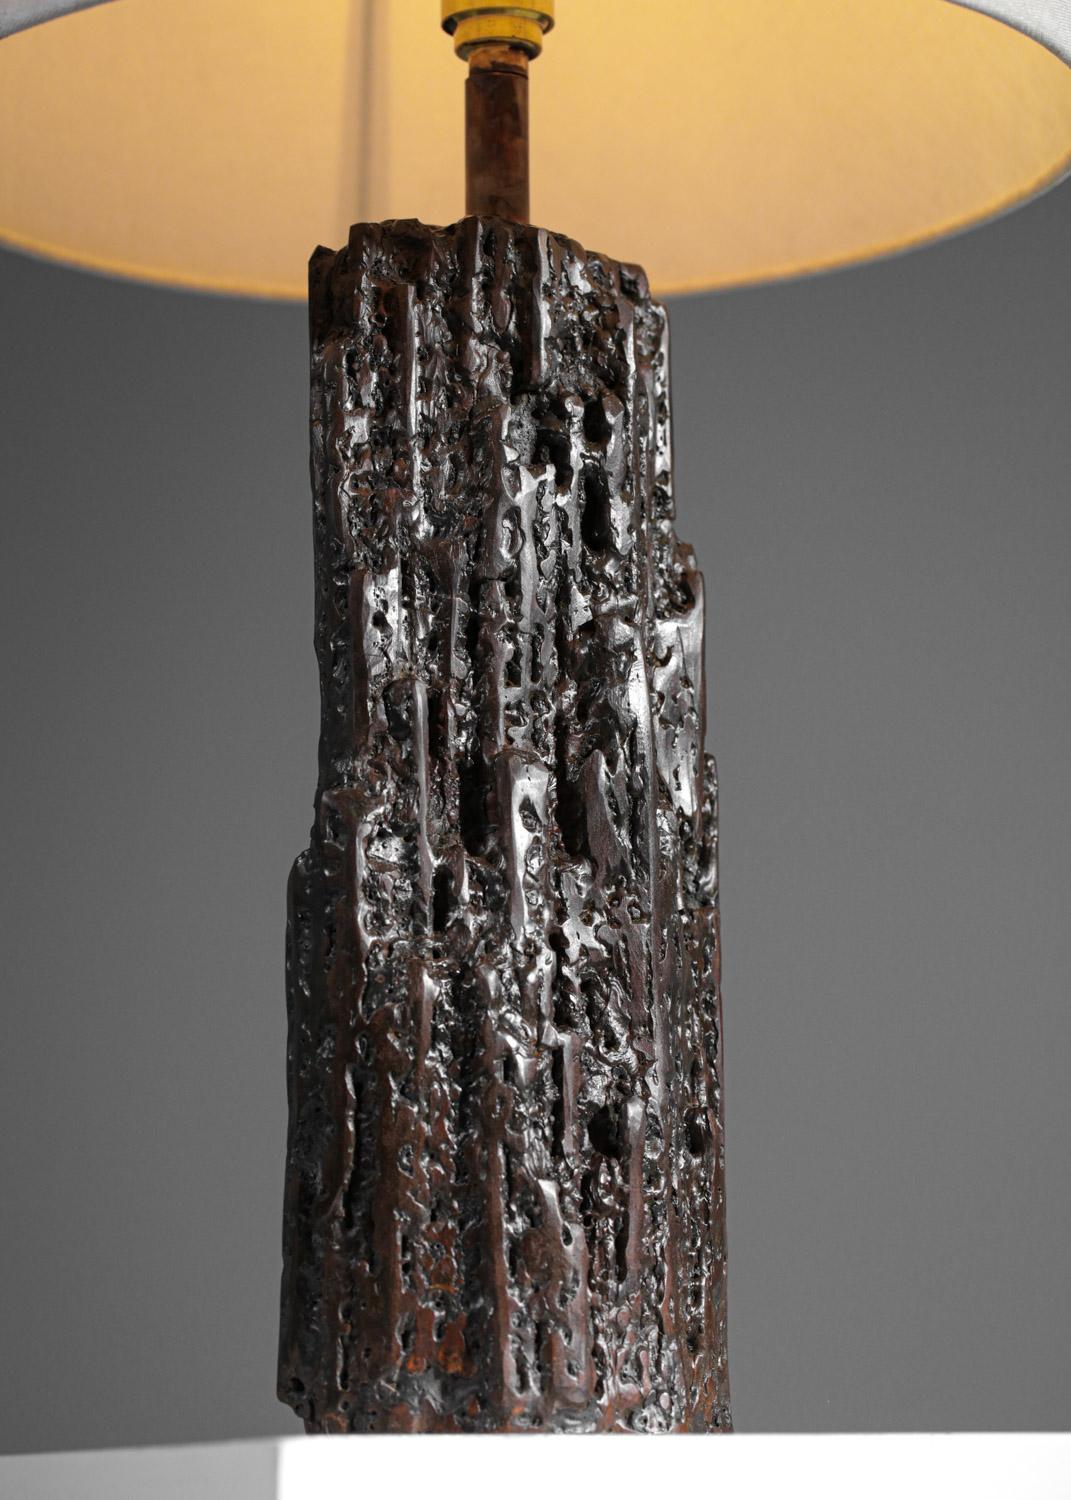 Organic Modern Table lamp by Donna for Danke Galerie with patinated metal base DONNA For Sale